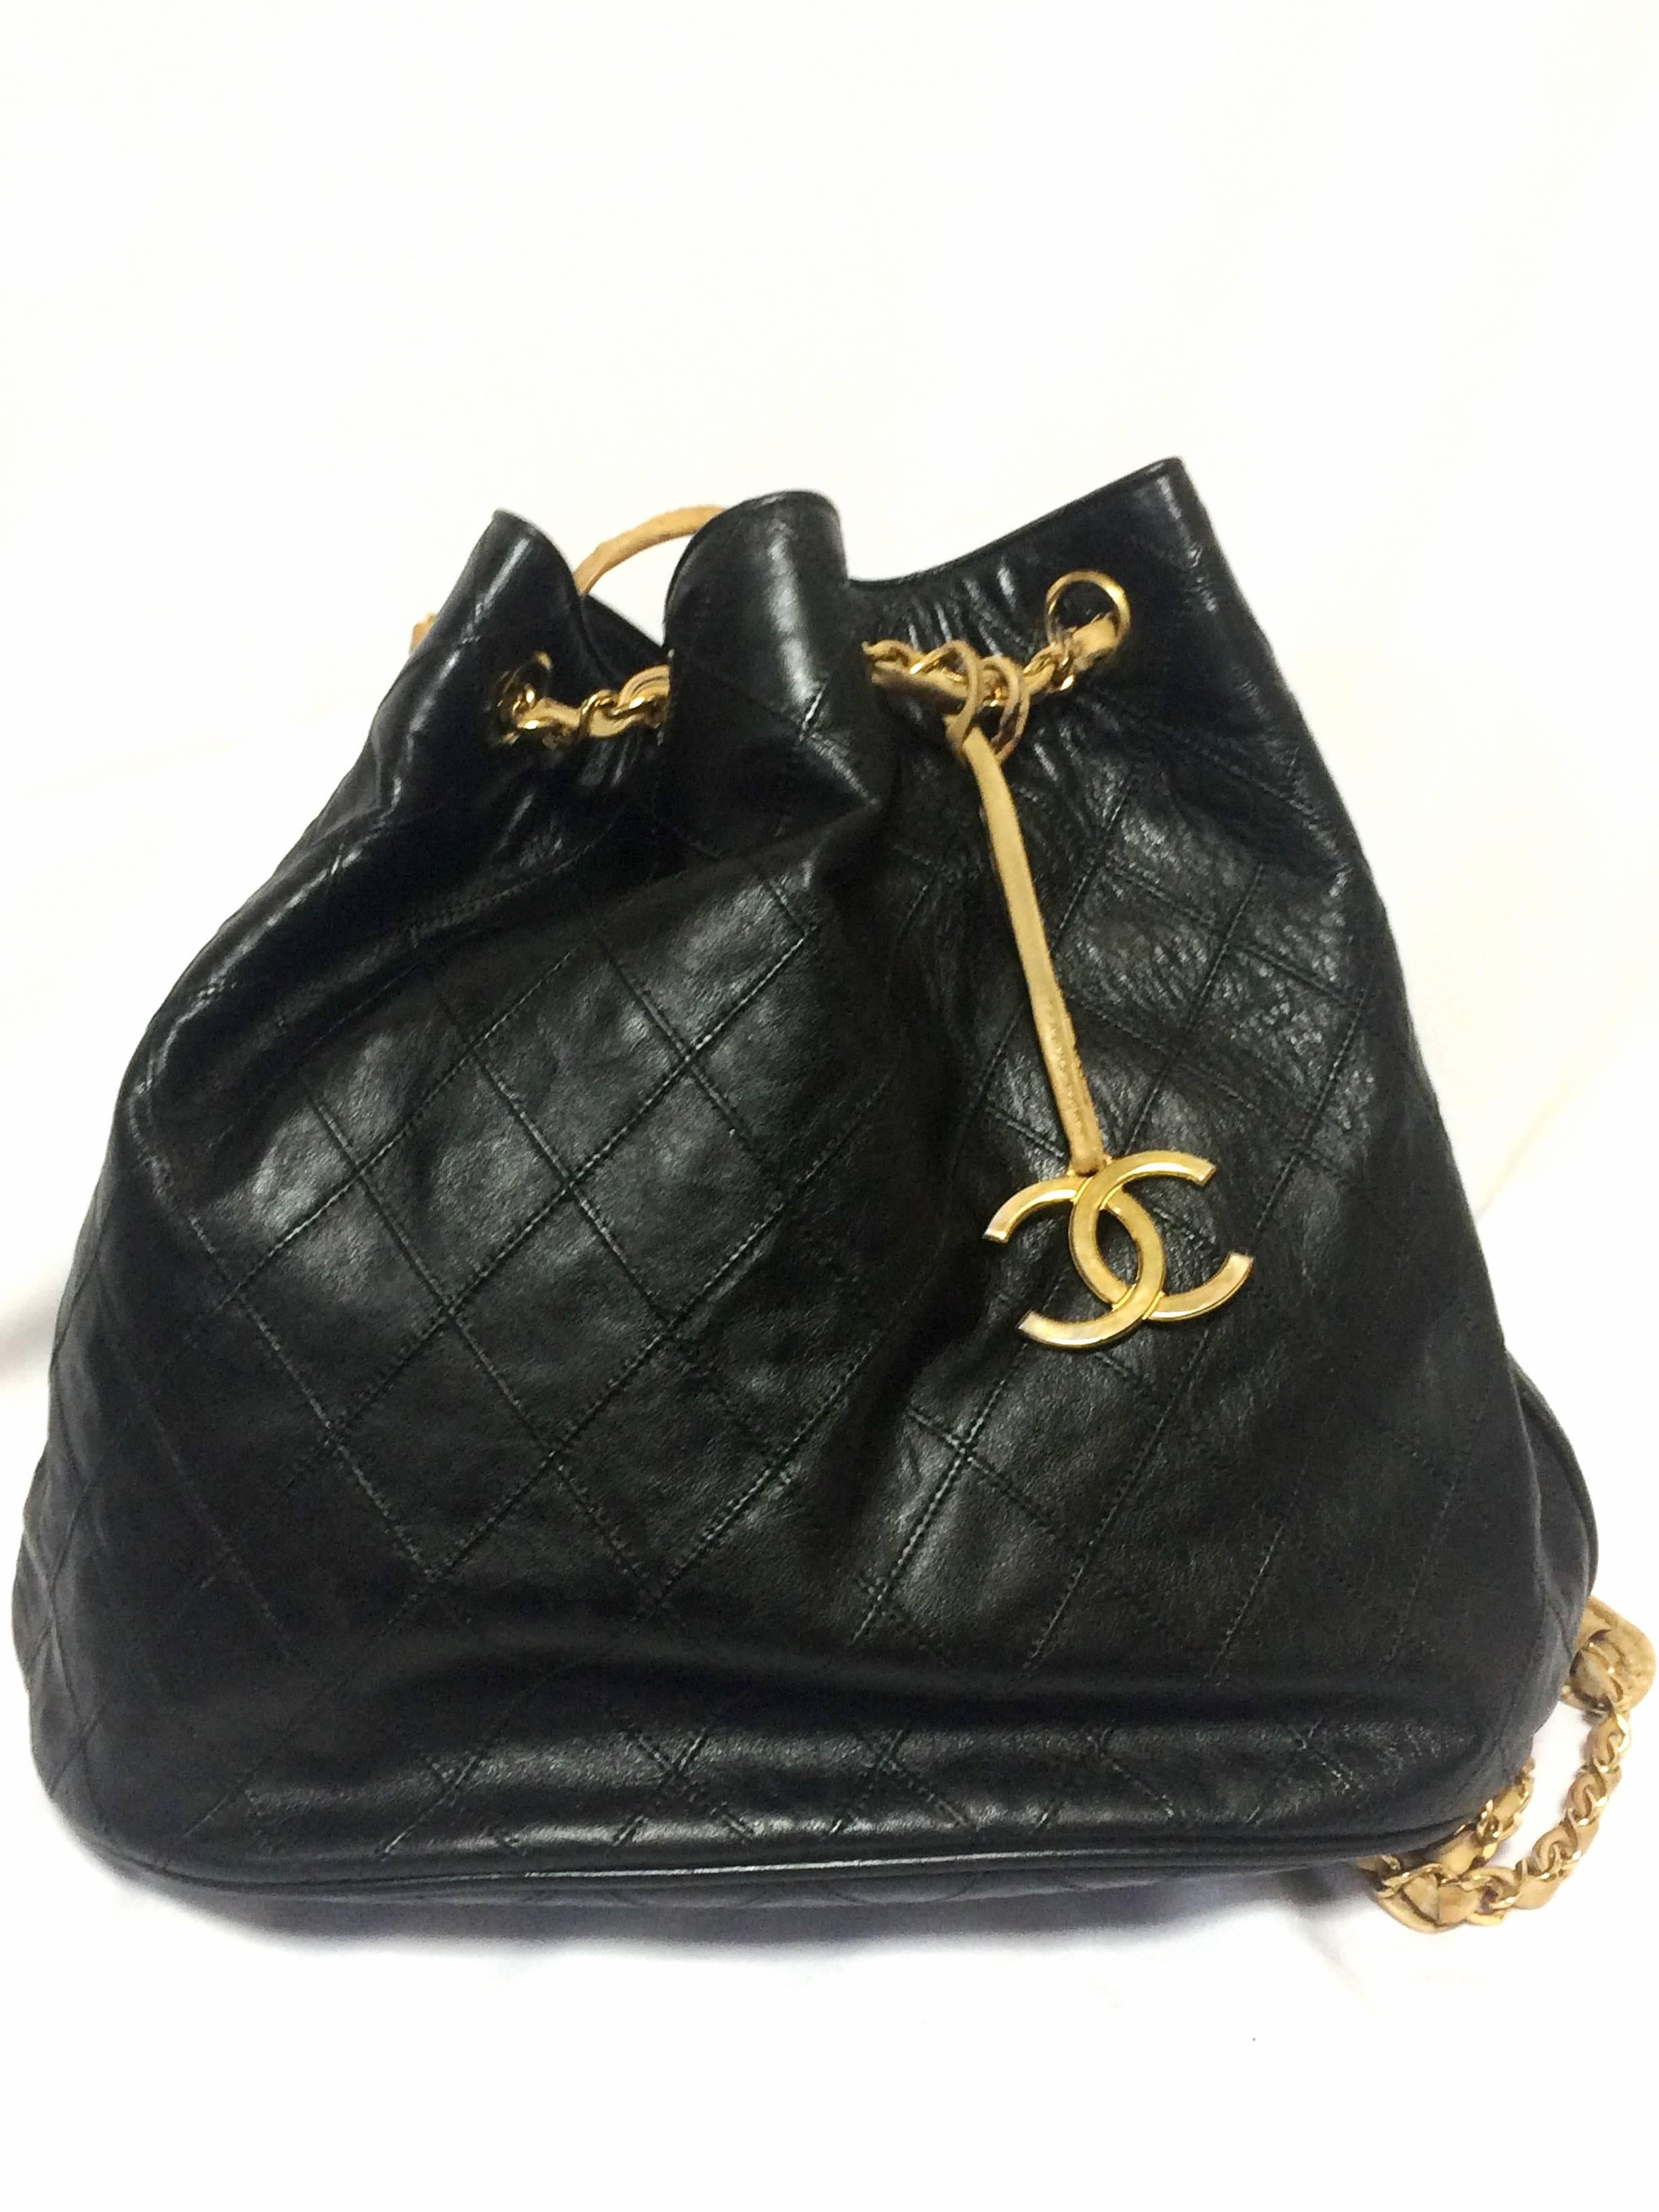 1980s. Vintage CHANEL black and beige calf leather hobo bucket shoulder bag with golden CC charm. Classic purse. 

Introducing another classic vintage bag from CHANEL back in the 80's.
The original color is beige, and the exterior is recolored to